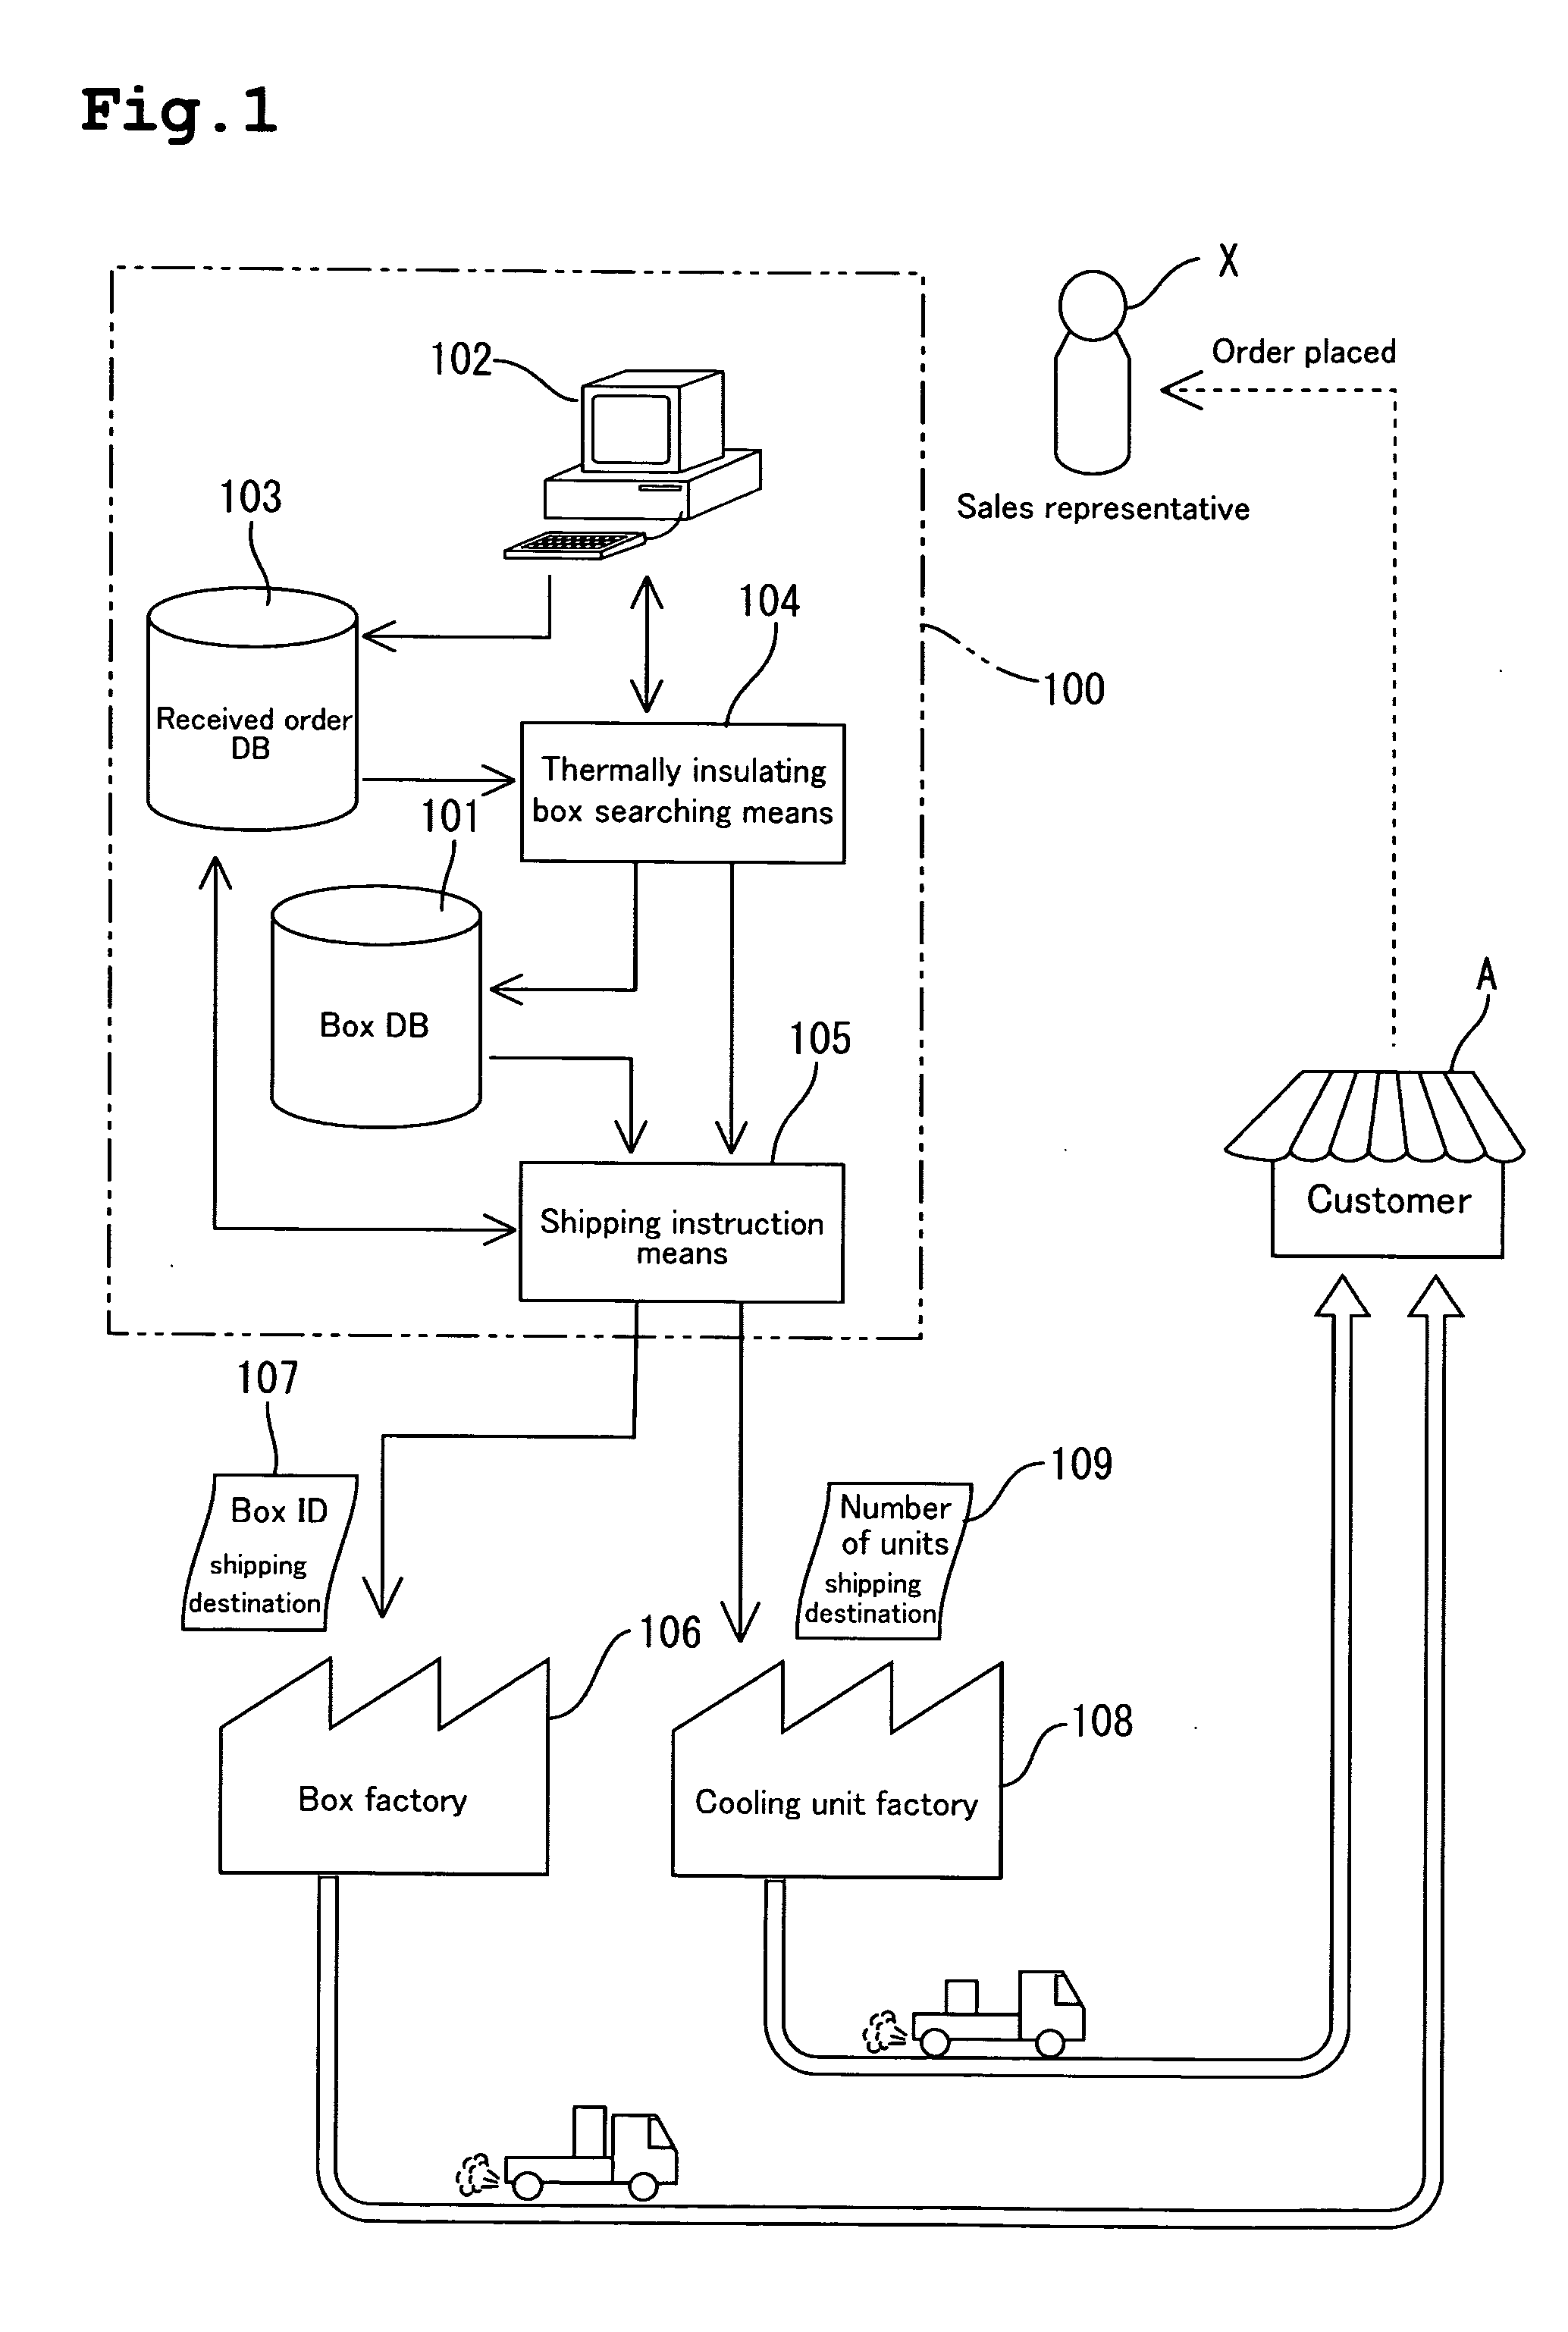 Method of manufacturing refrigerated repositories and sales management system for refrigerated storage